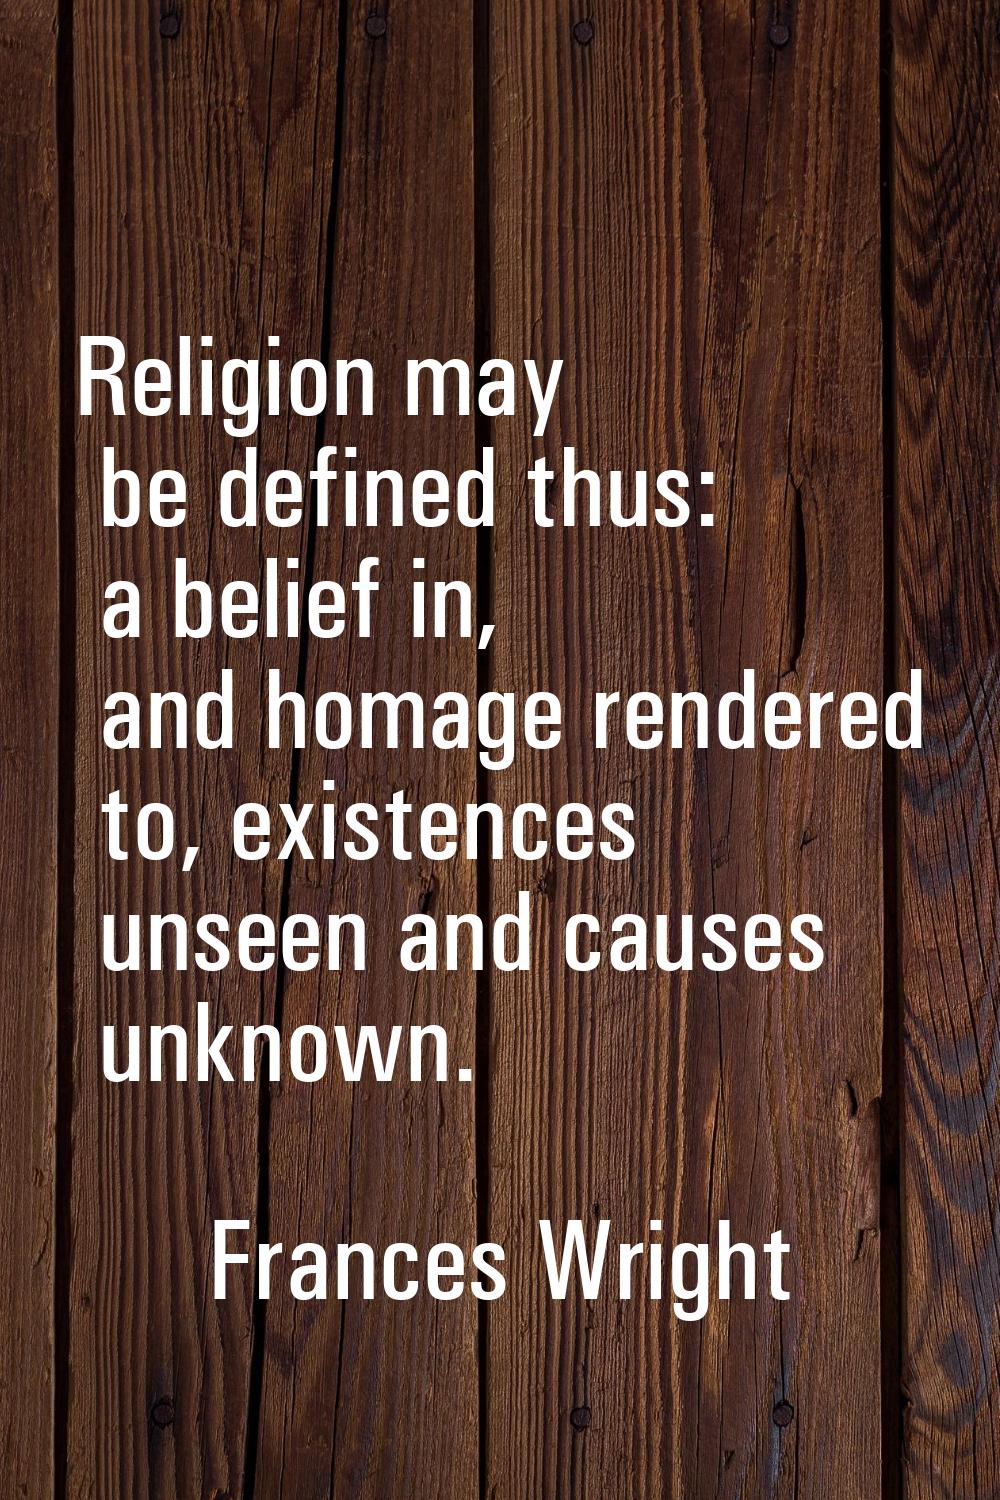 Religion may be defined thus: a belief in, and homage rendered to, existences unseen and causes unk